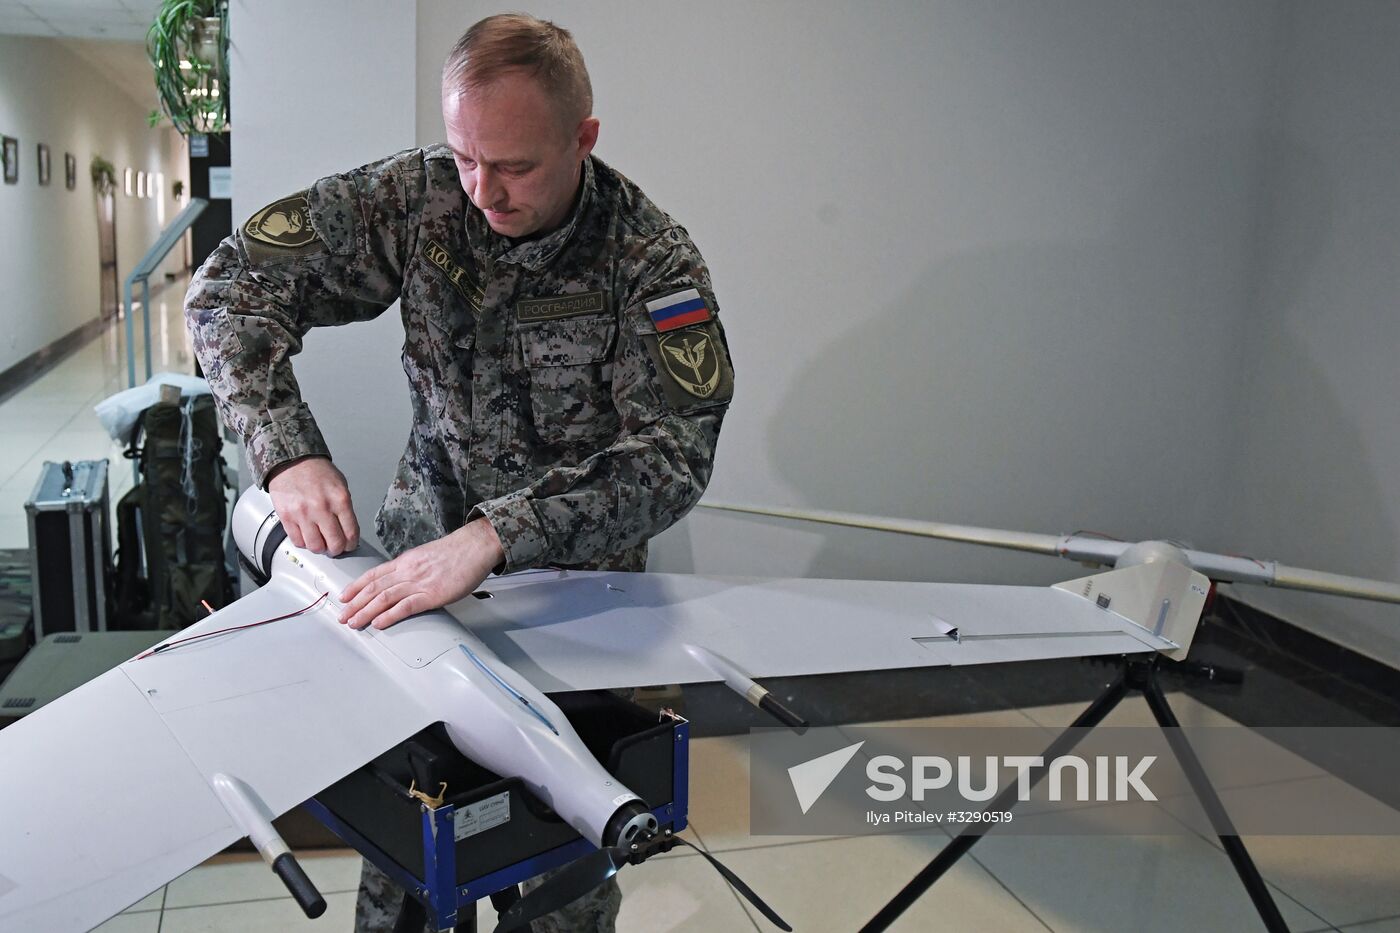 Drones for National Guard aviation units